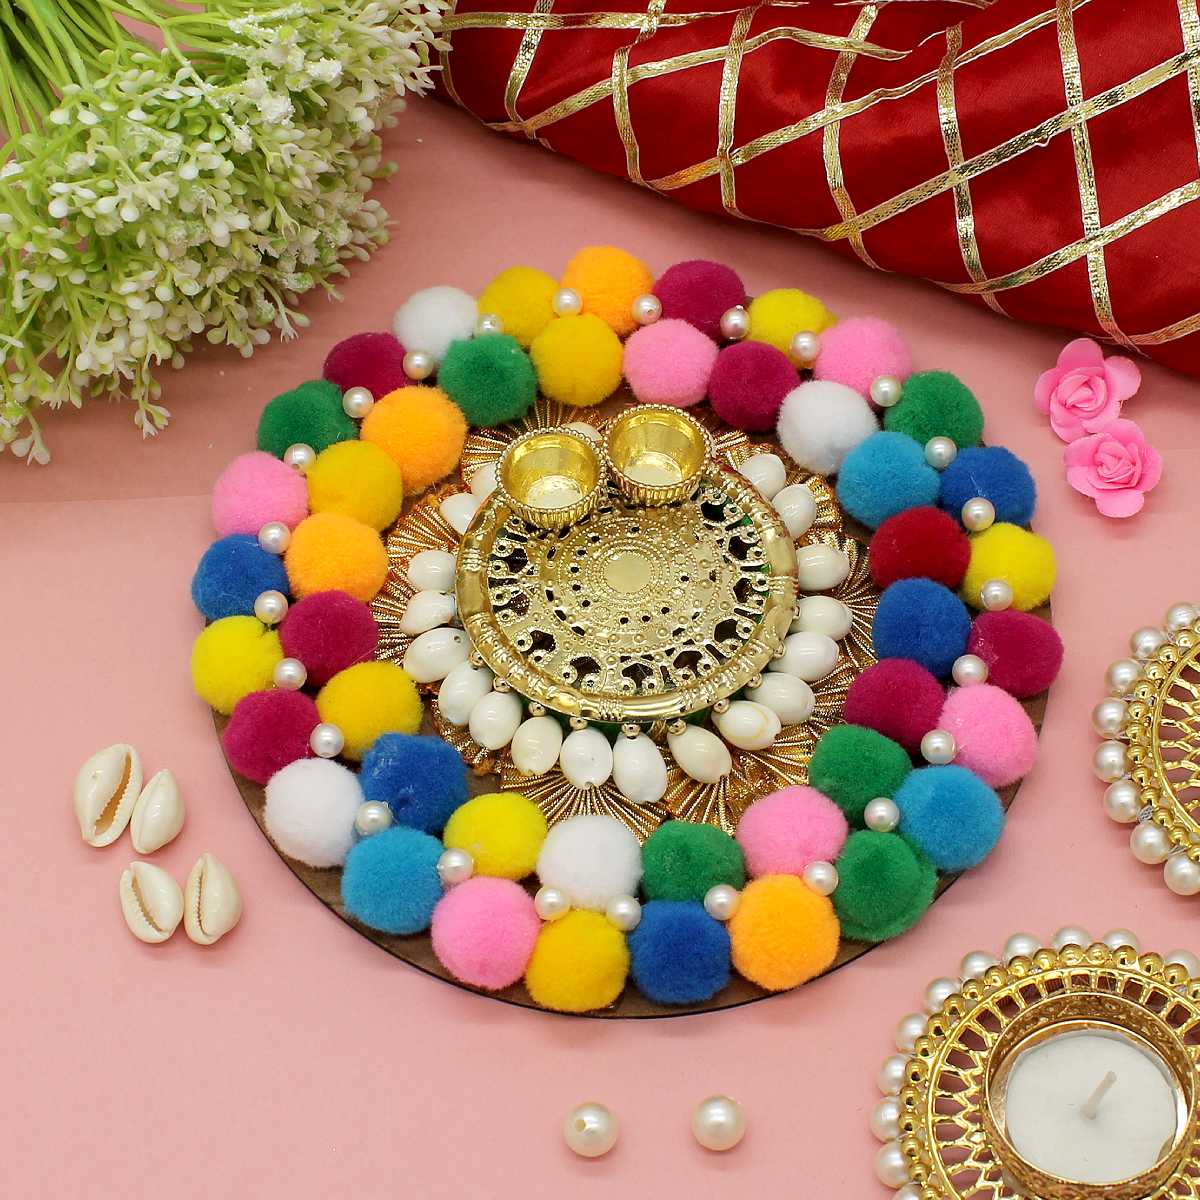 Pom pom and kodi decorated Roli Chawal Thali for Occasions